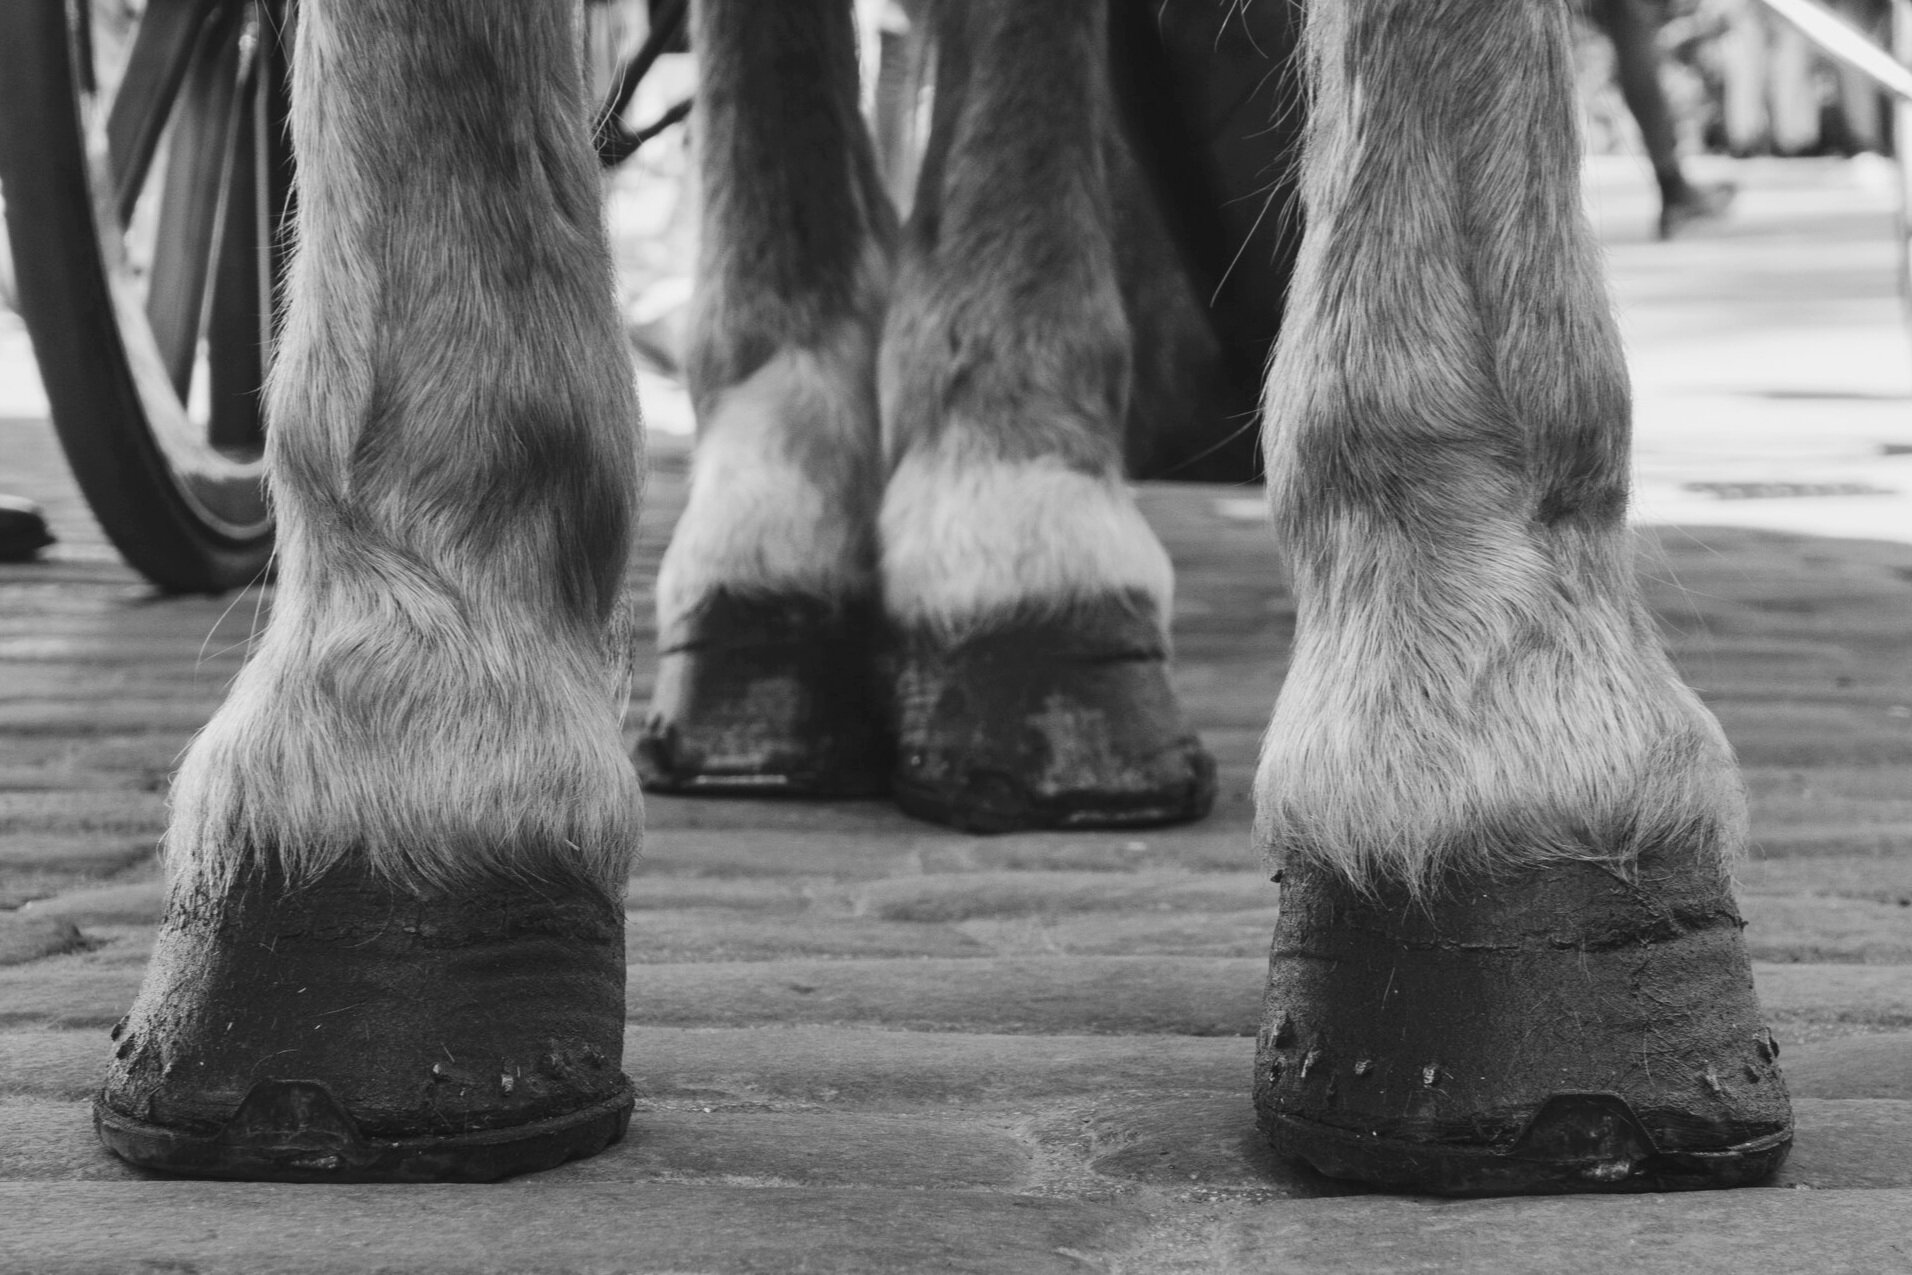 Do Horses Need Shoes? What Is Their Purpose